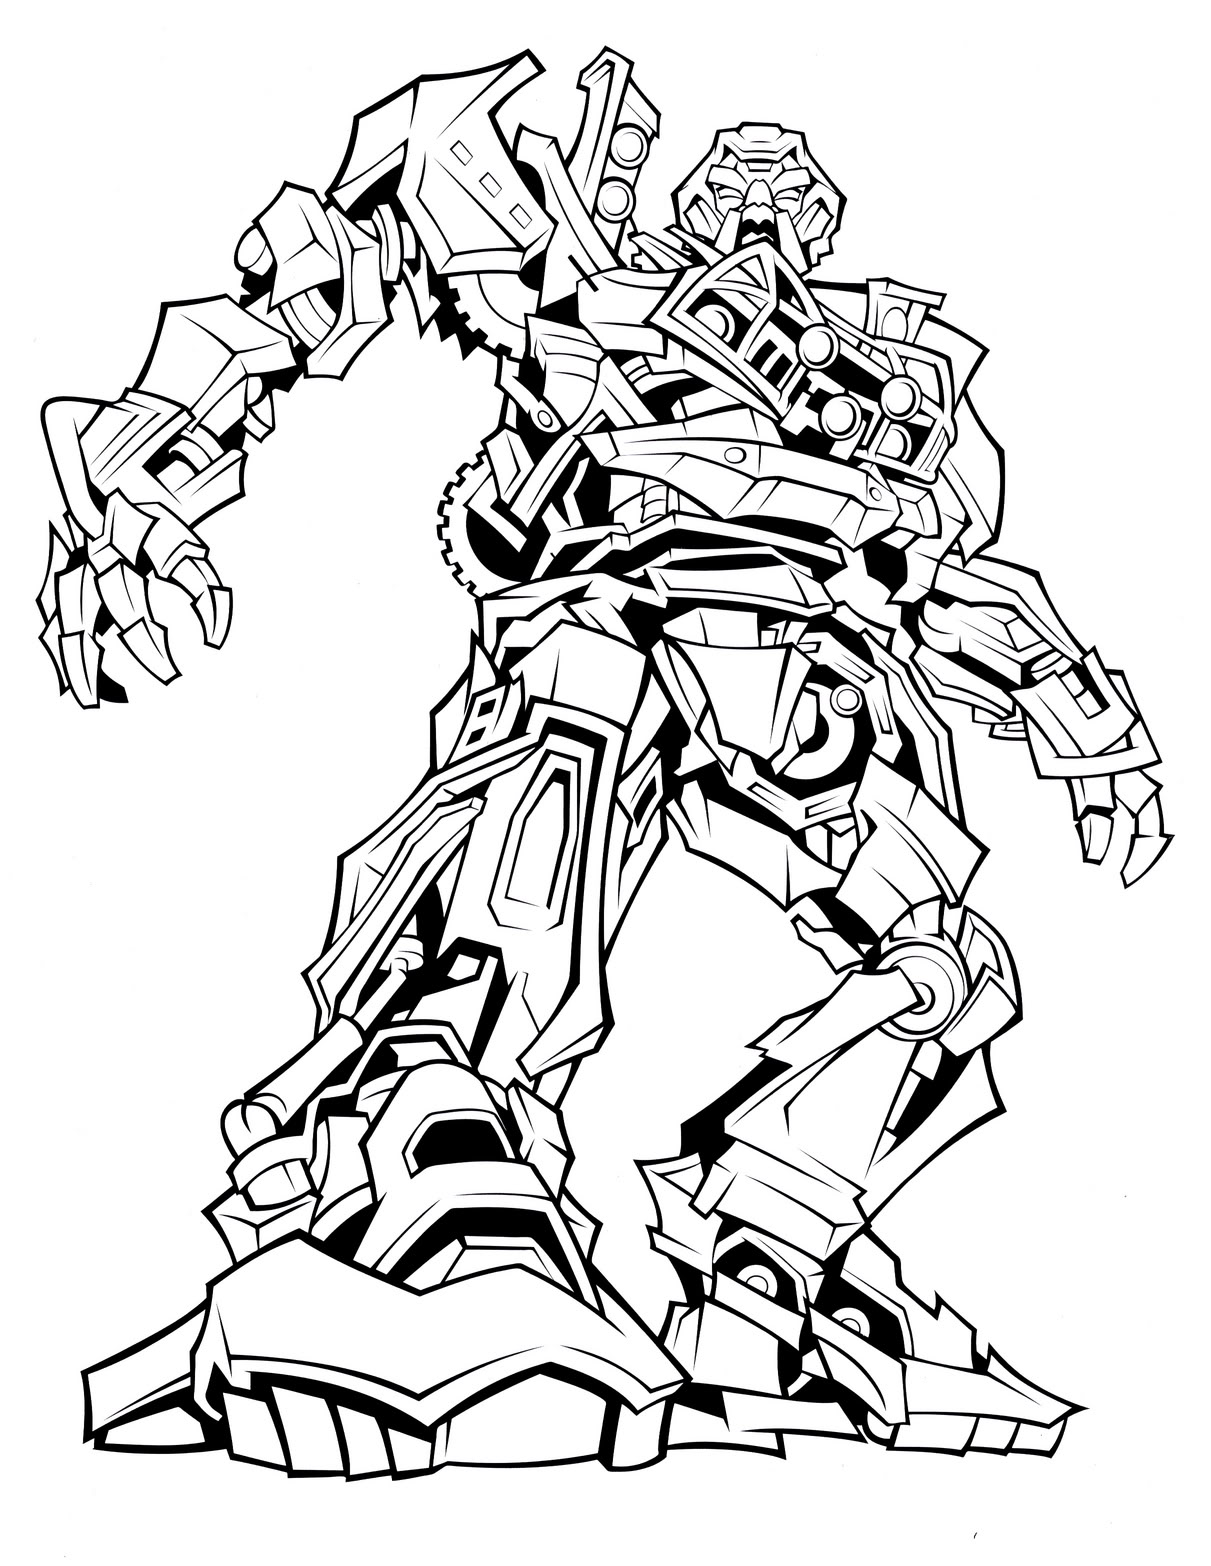 Ratchet from Transformers Coloring Page